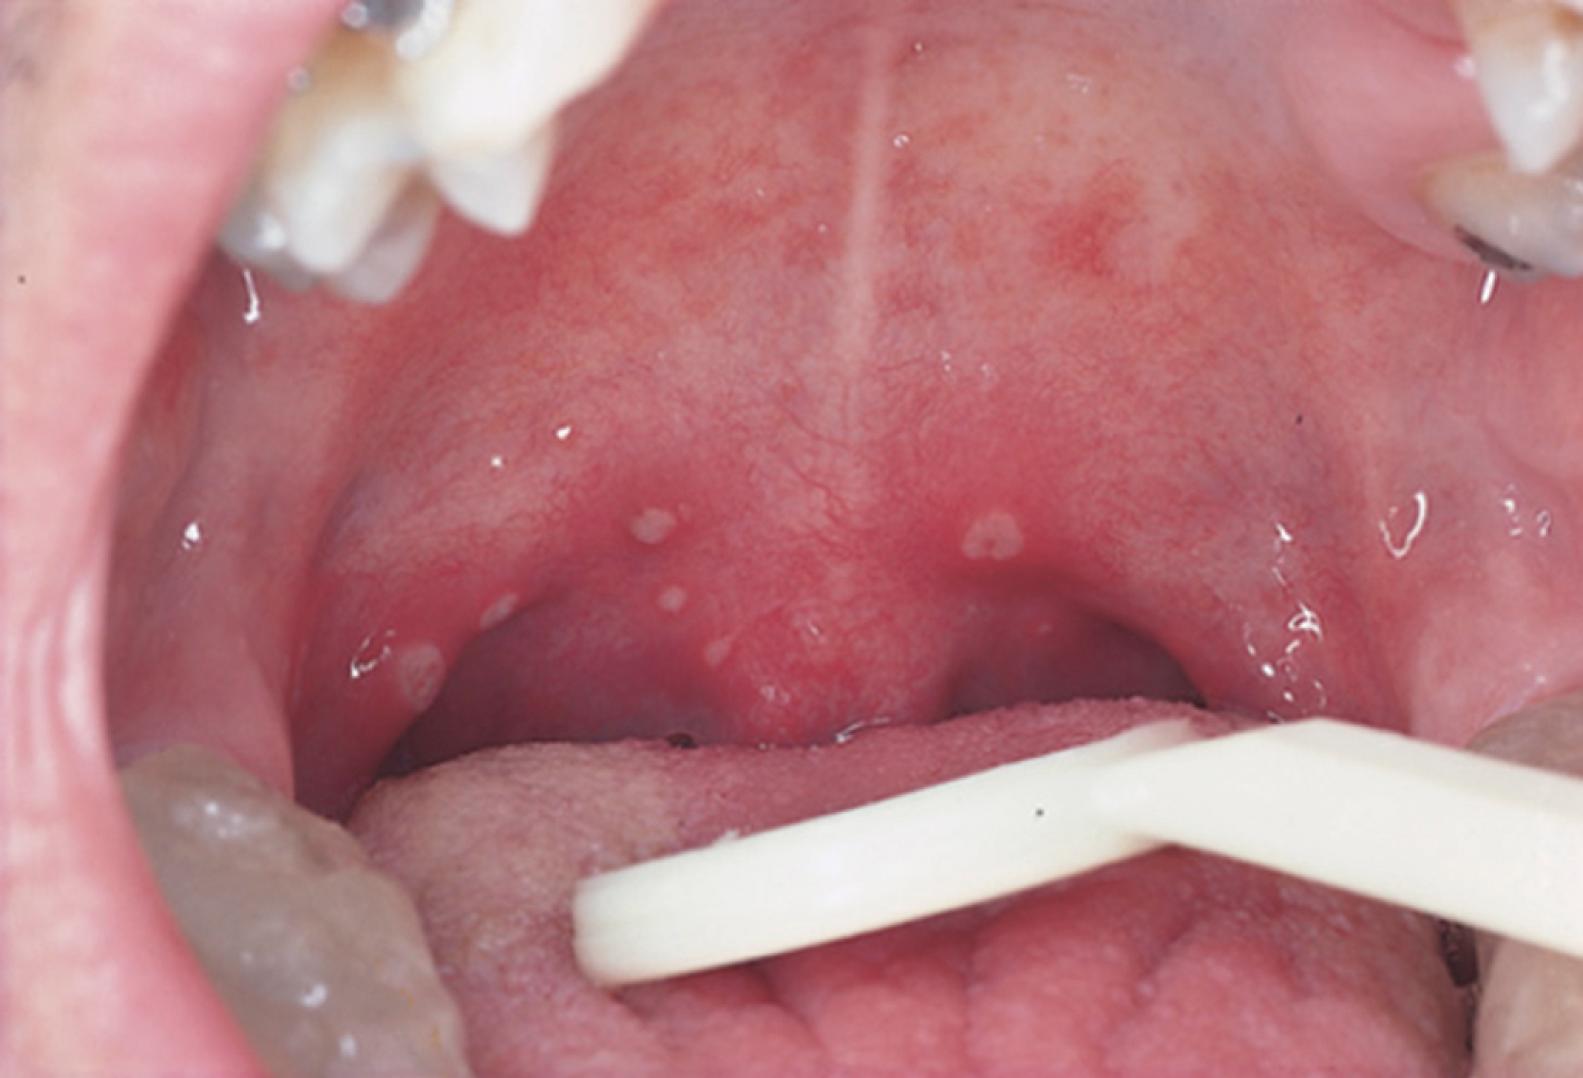 Fig. 22.1, Herpangina. Viral ulcer on the right tonsil consistent with coxsackievirus infection.